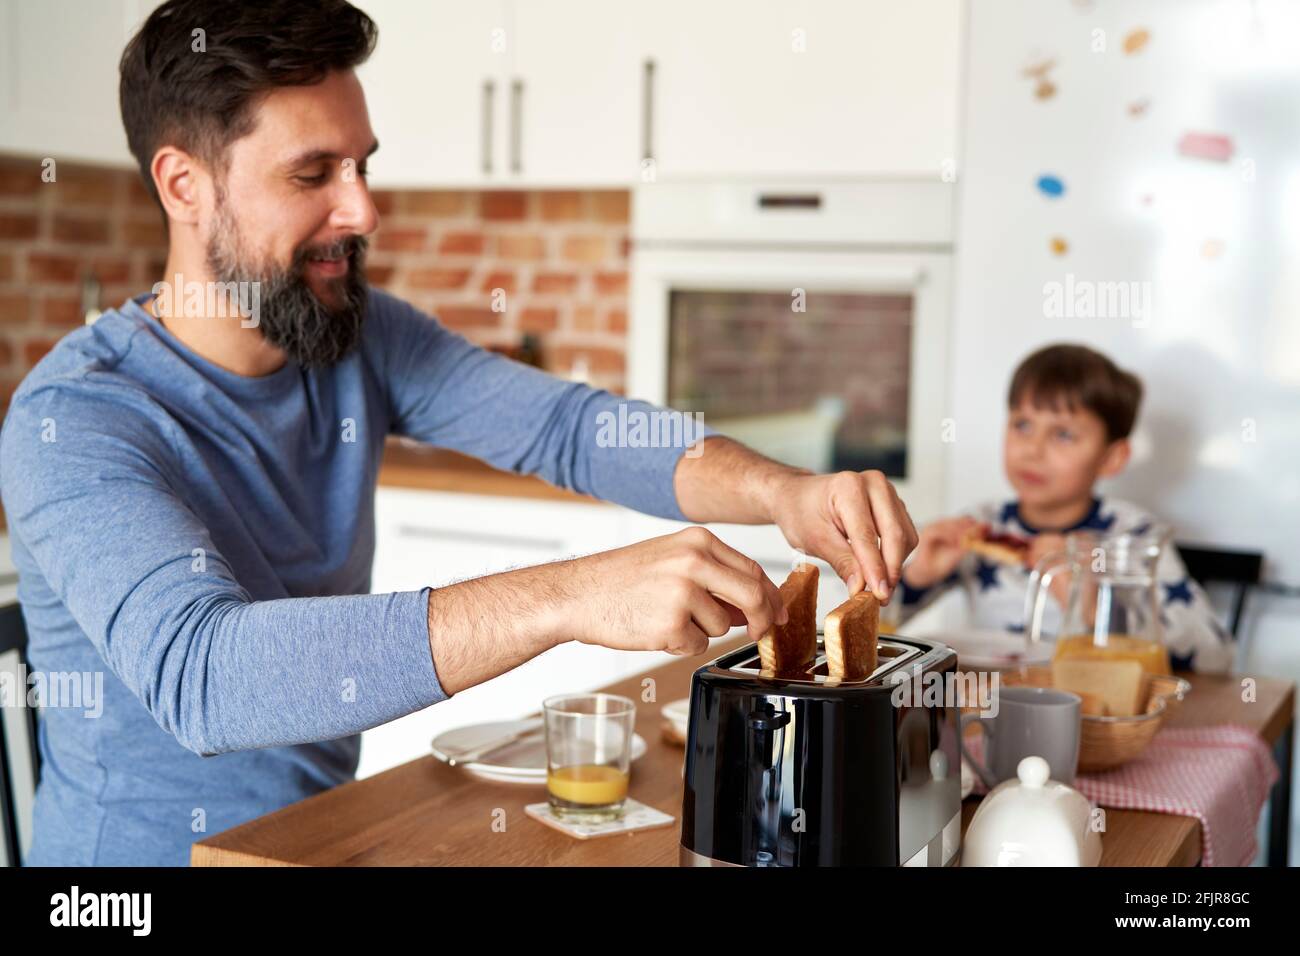 Father and son having breakfast together Stock Photo